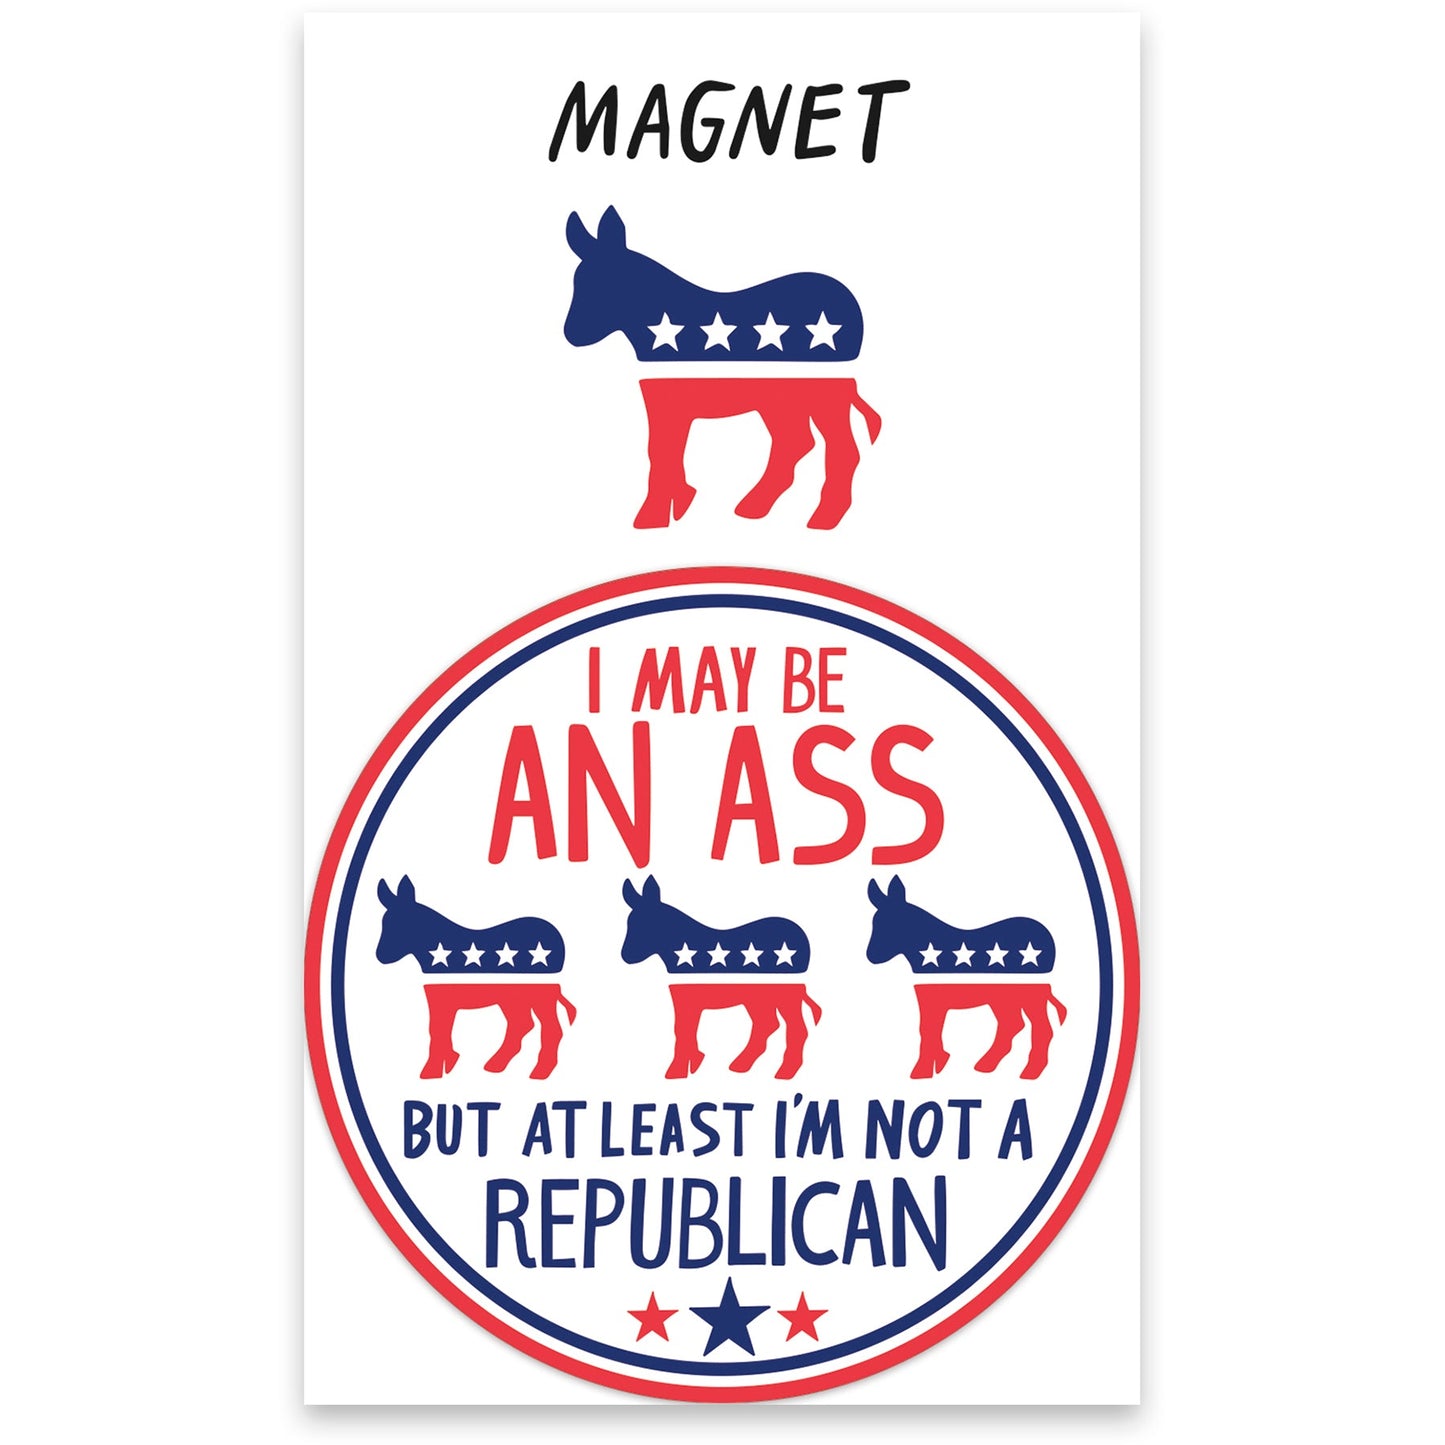 I May Be an Ass But At Least I'm Not a Republican Magnet Memo Holder | 2.50" x 2.50"